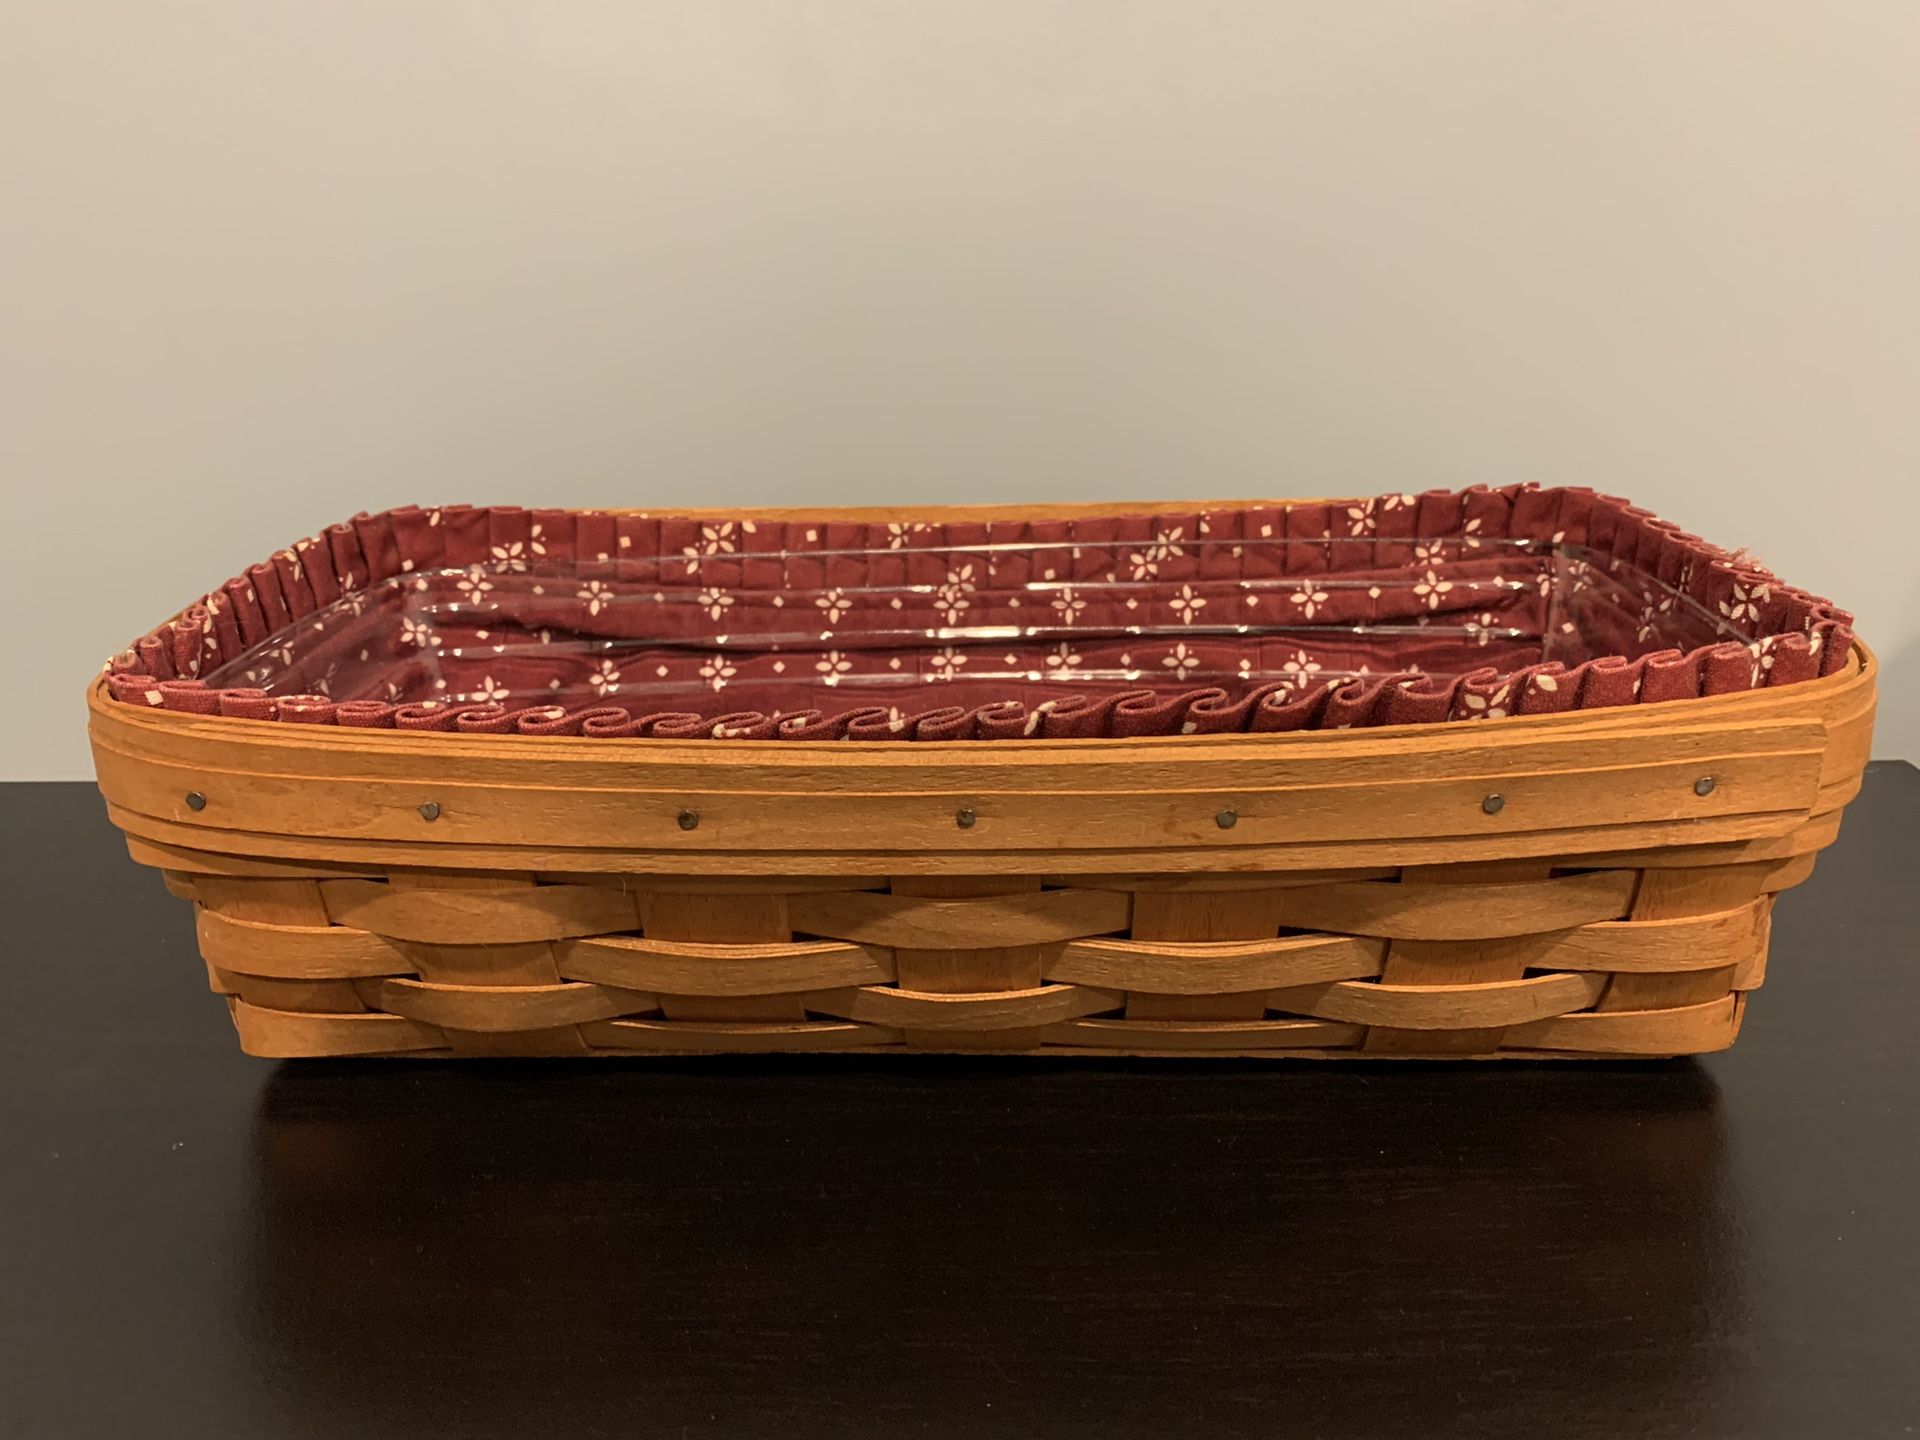 Longaberger Bread Basket 1993 with Fabric Liner and Protective Plastic Insert